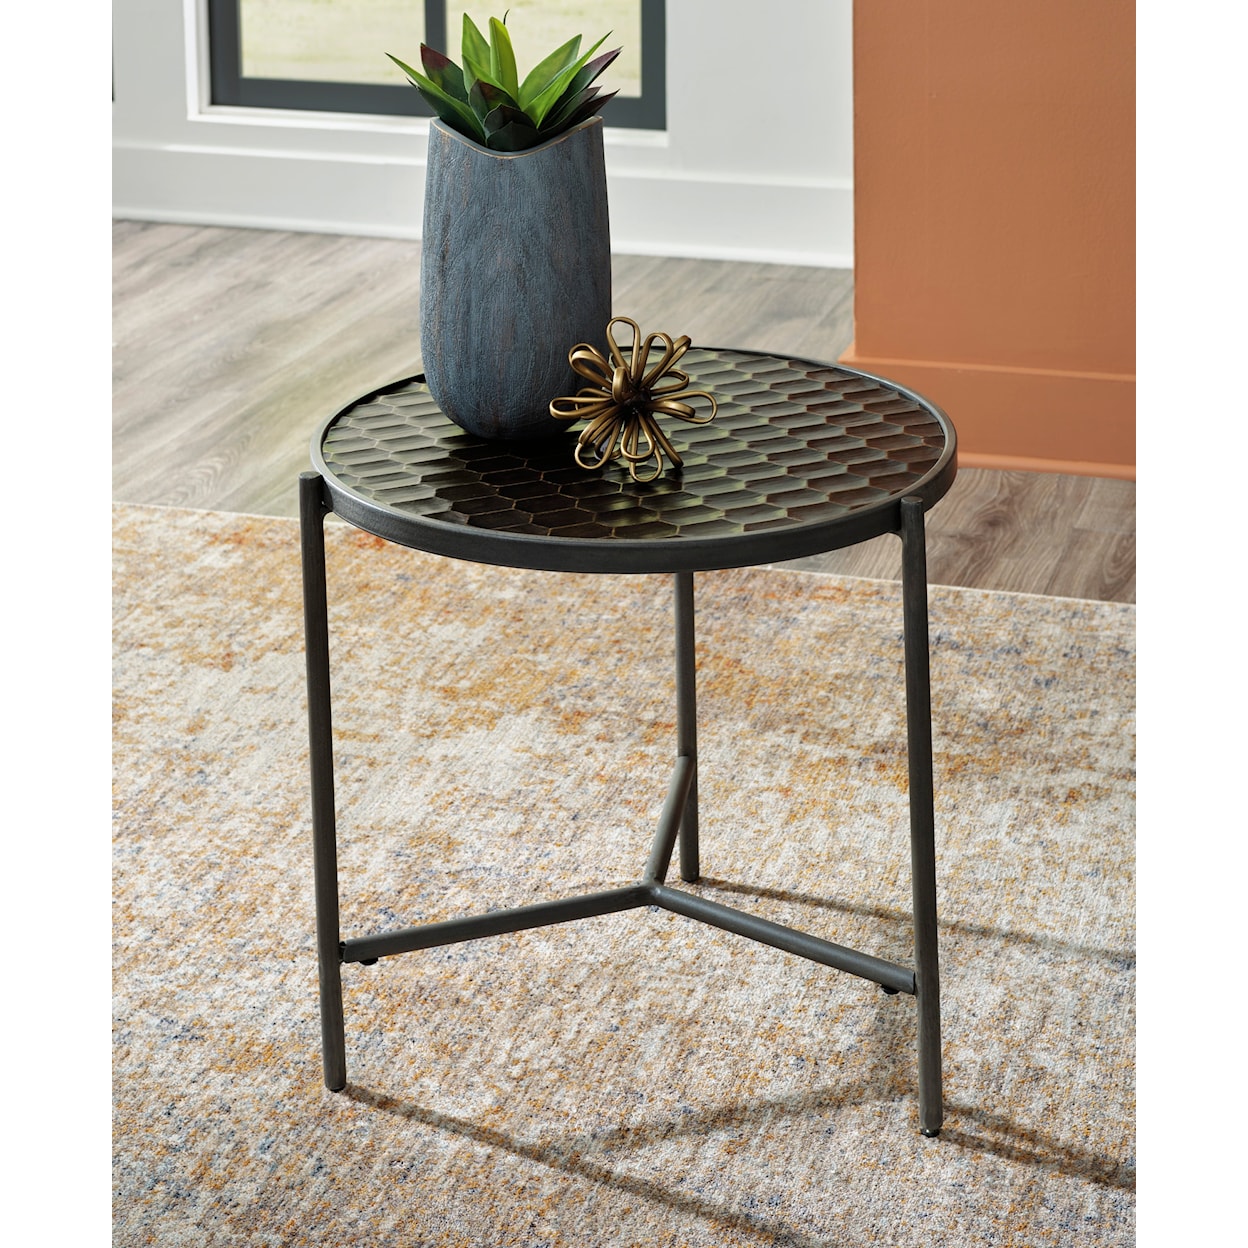 Benchcraft Doraley End Table